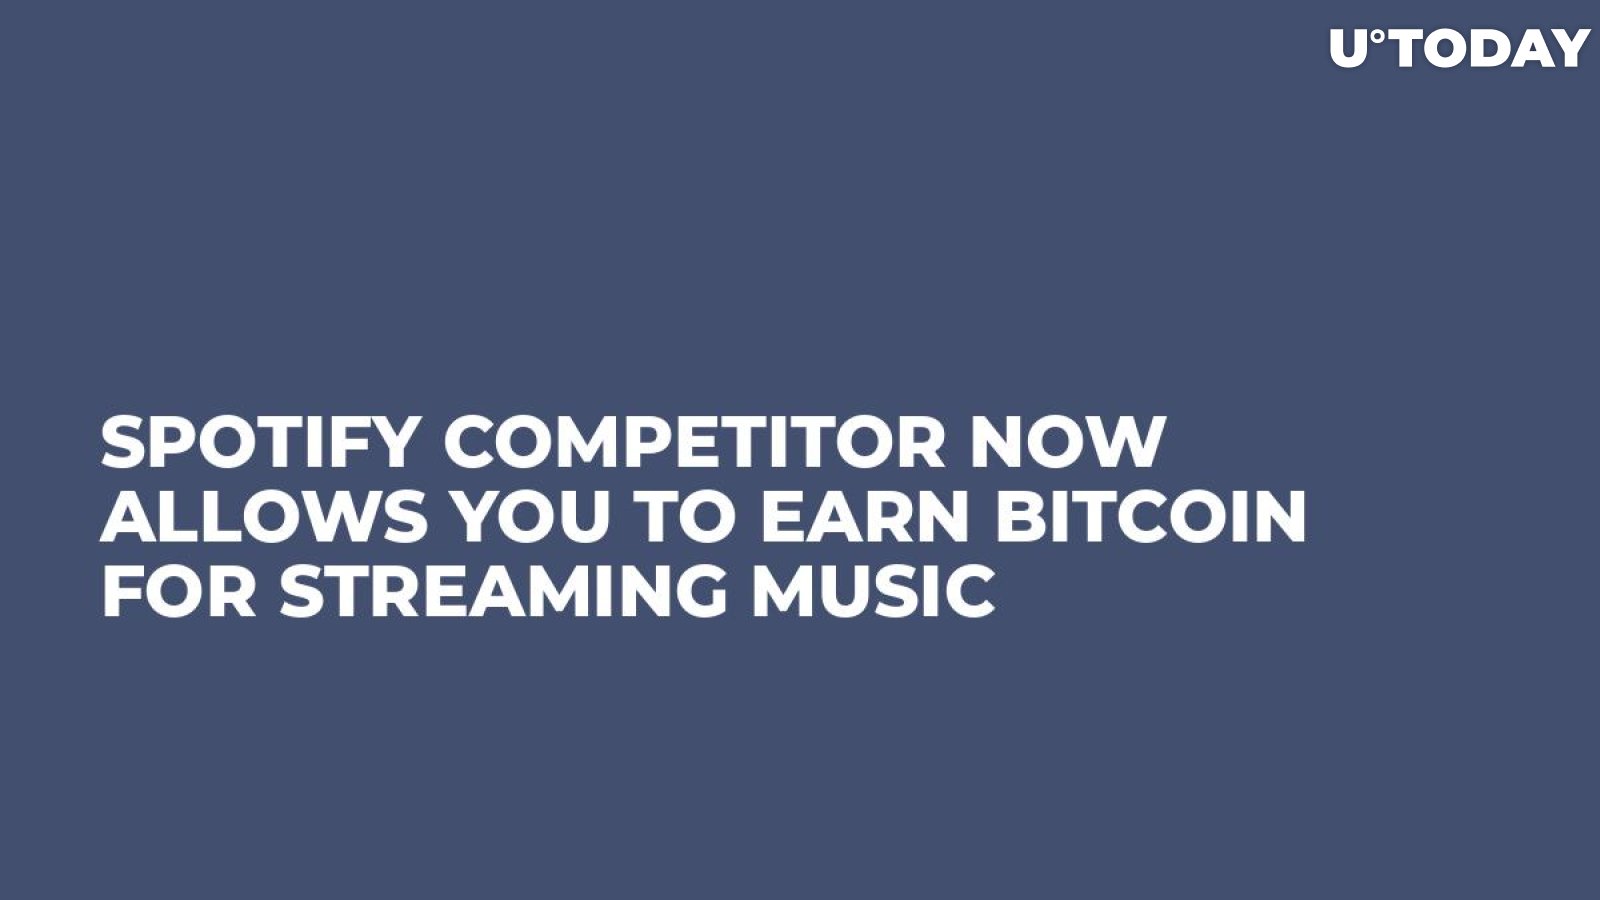 Spotify Competitor Now Allows You to Earn Bitcoin for Streaming Music 